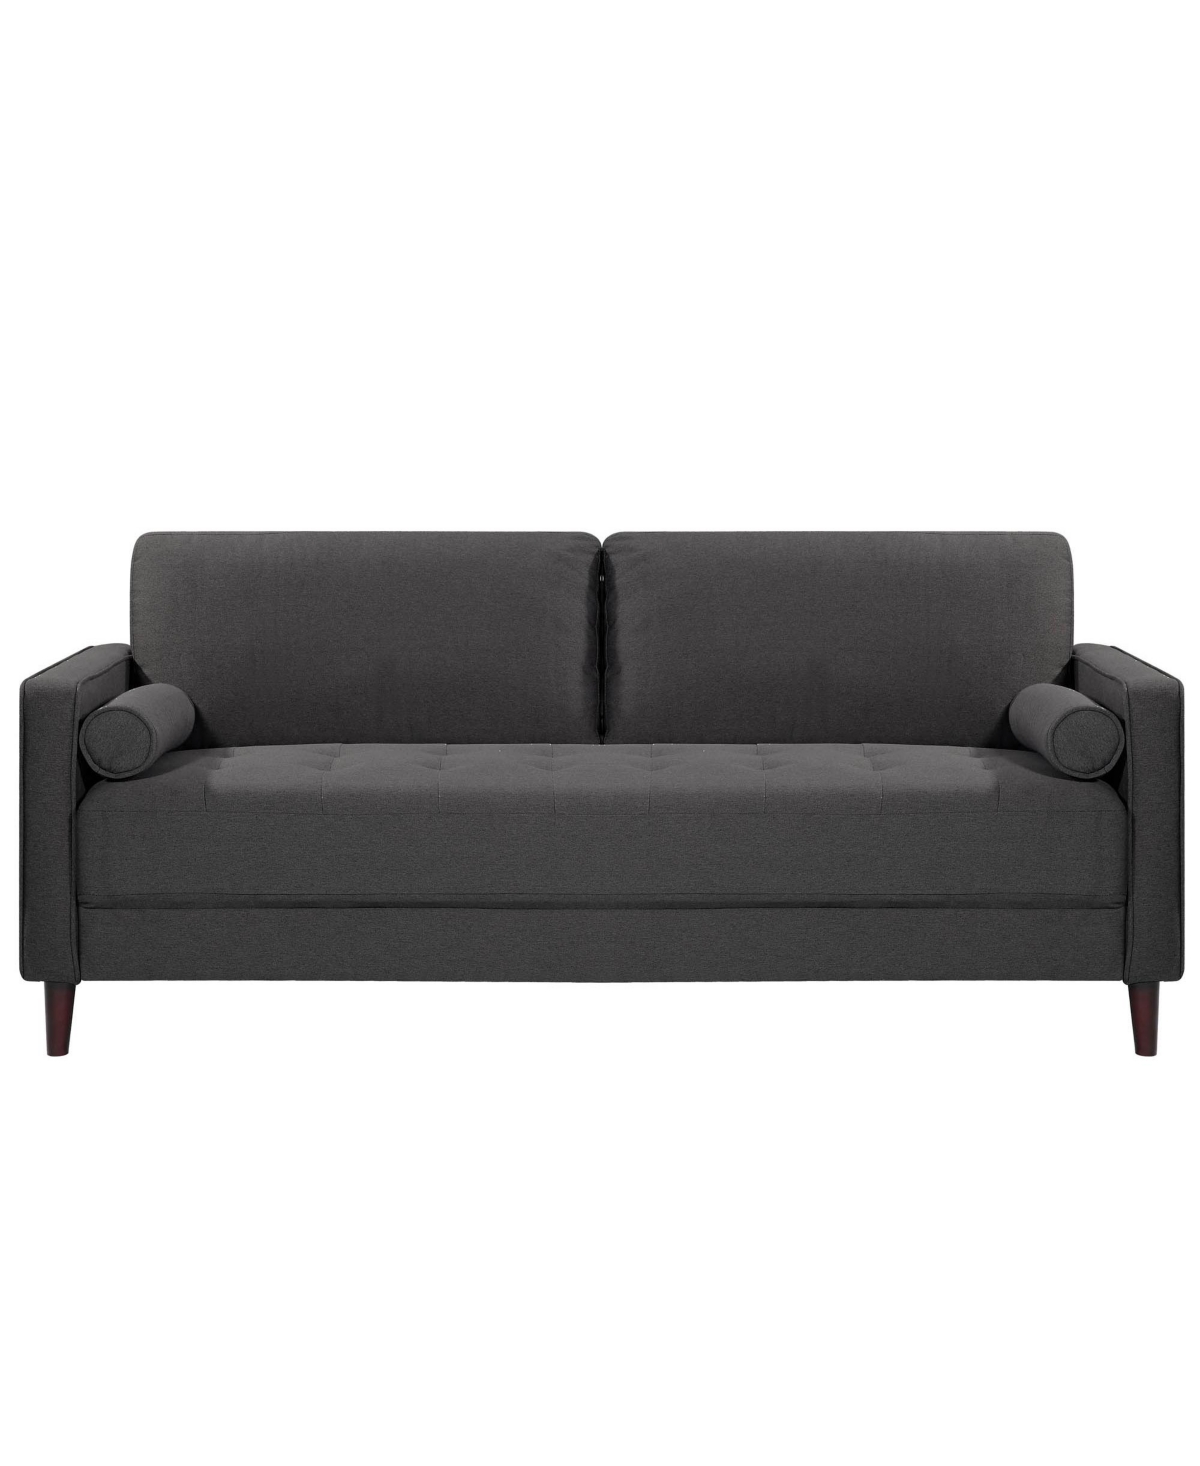 Lifestyle Solutions Lillith Sofa In Heather Gray